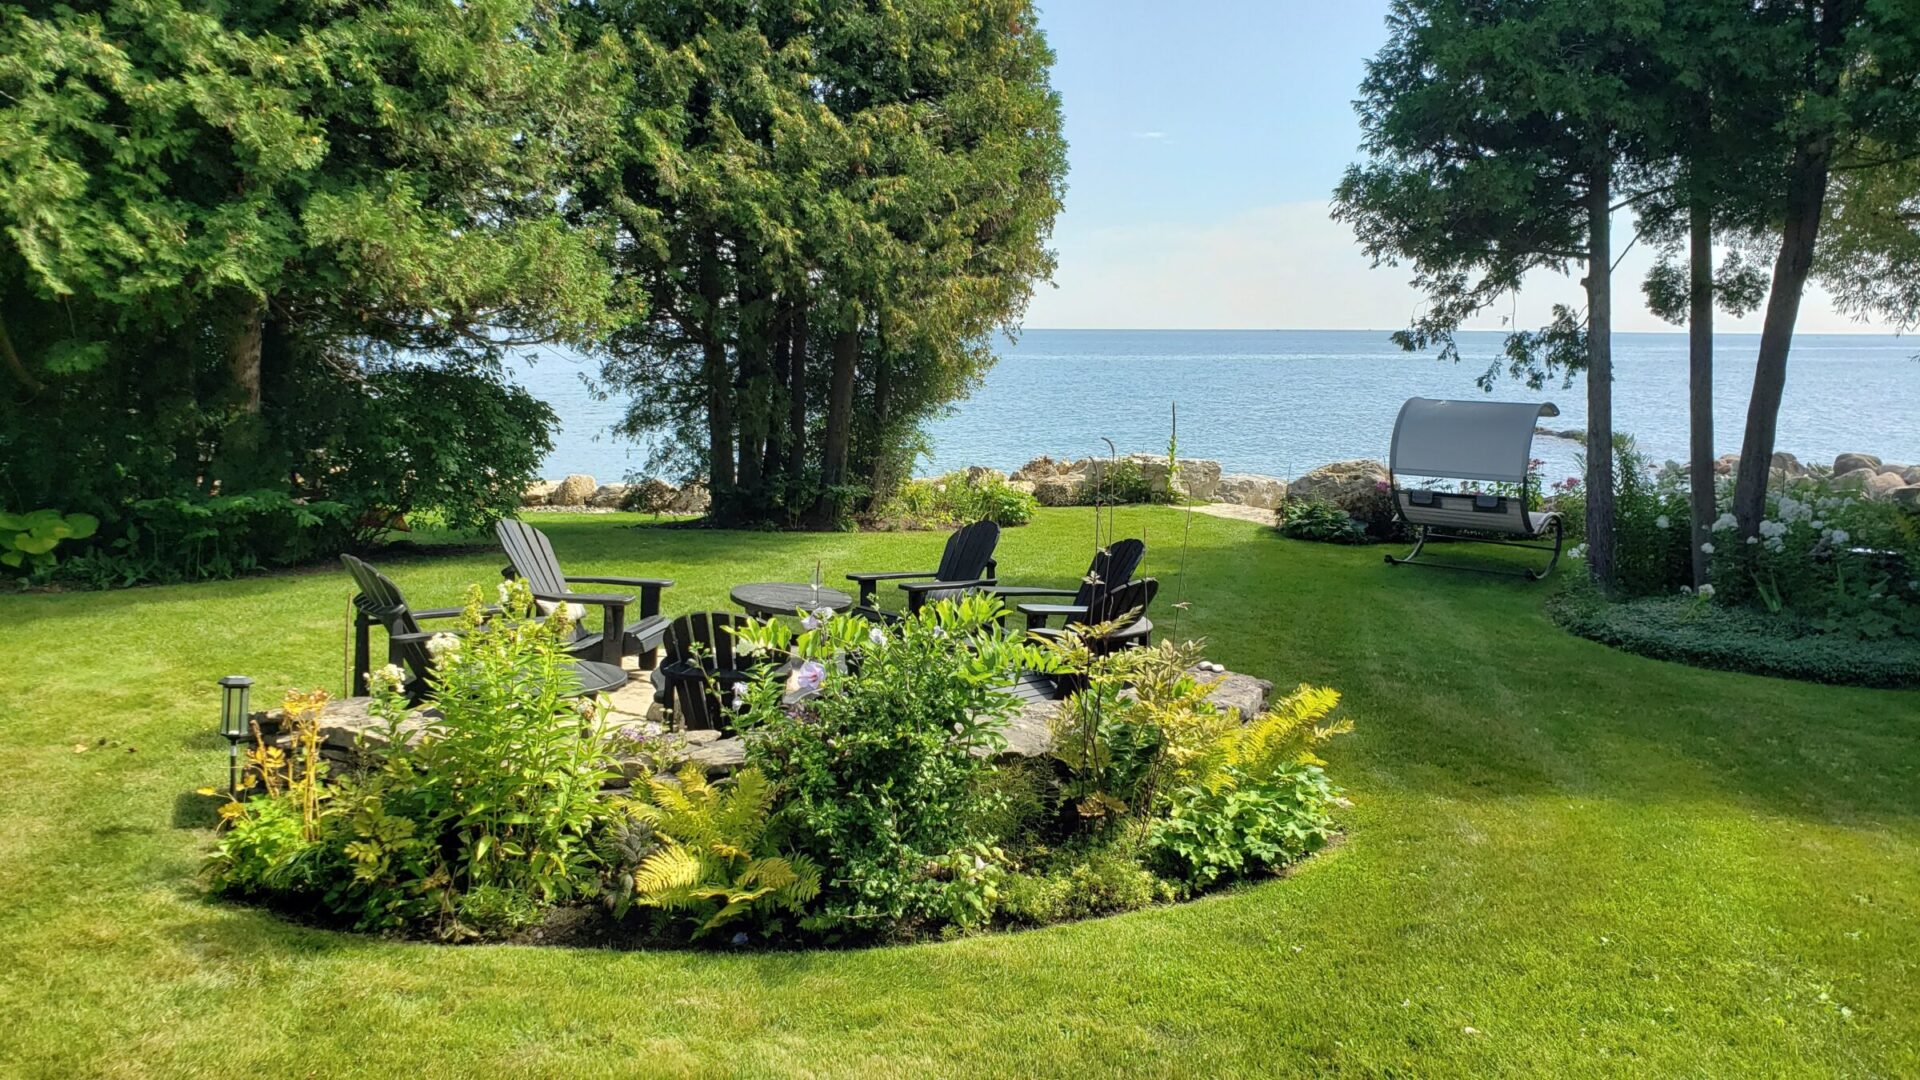 A tranquil lakeside garden scene with black Adirondack chairs, a lush lawn, a blooming flower bed, and a swing overlooking calm blue waters.